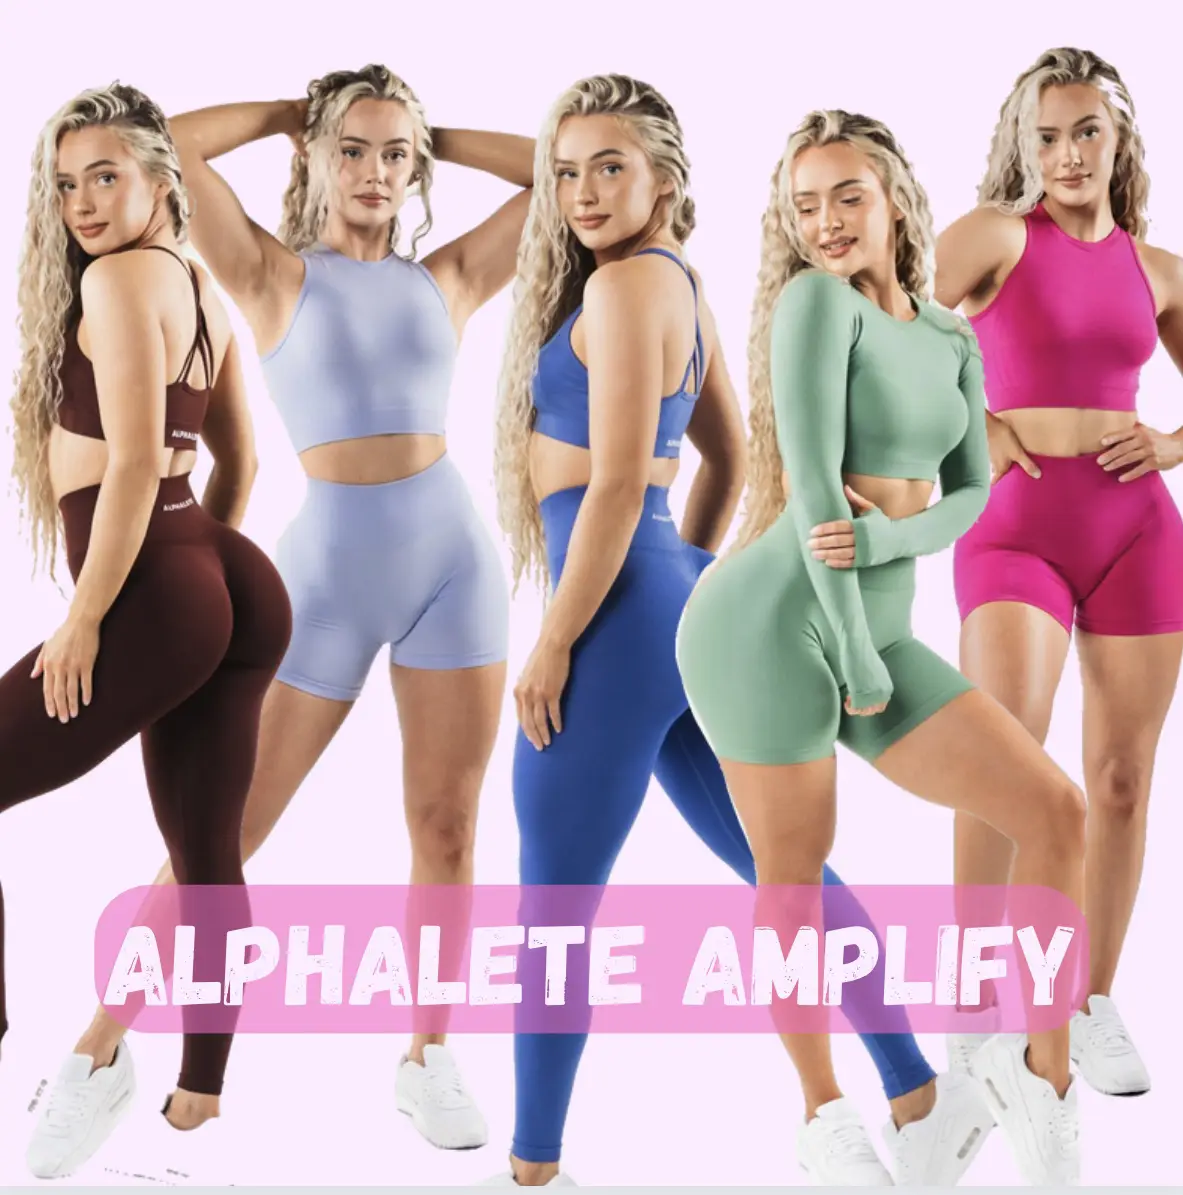 ALPHALETE amplify launch overview, Gallery posted by Baileymstewart